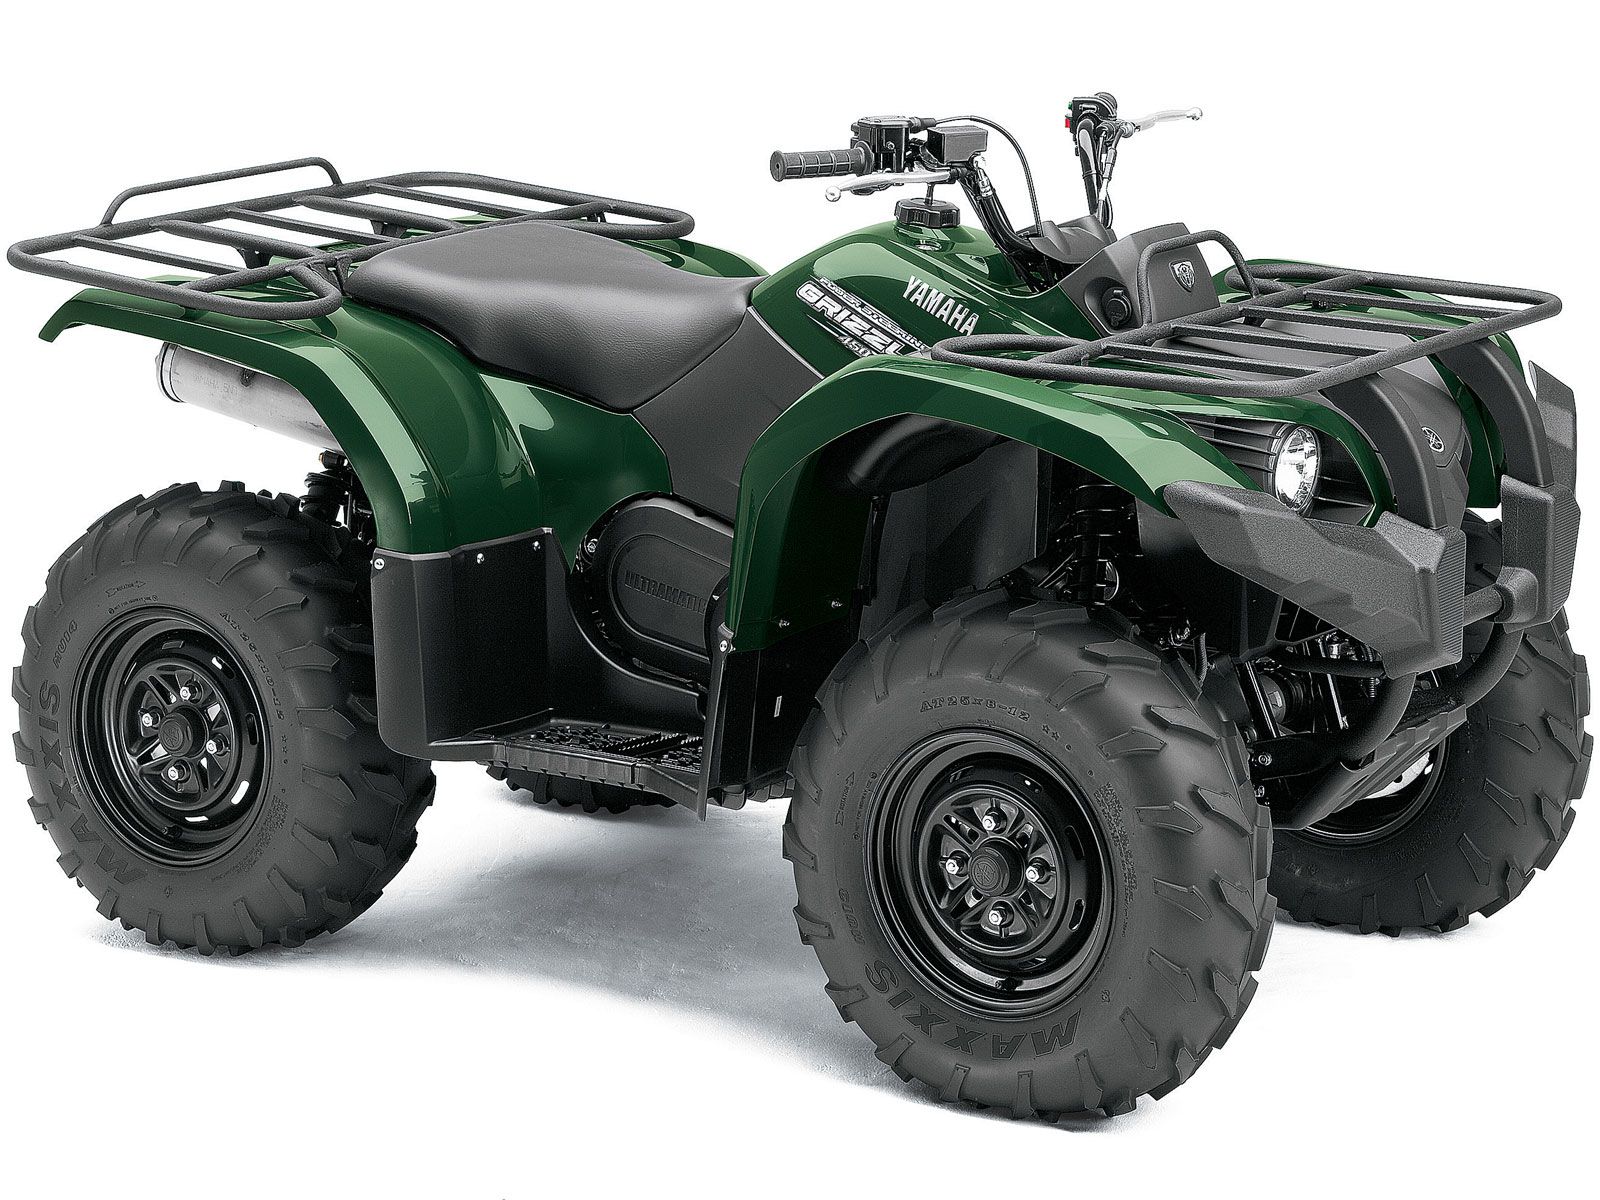 First Ride: 2011 Yamaha Grizzly 4X4 EPS | ATV